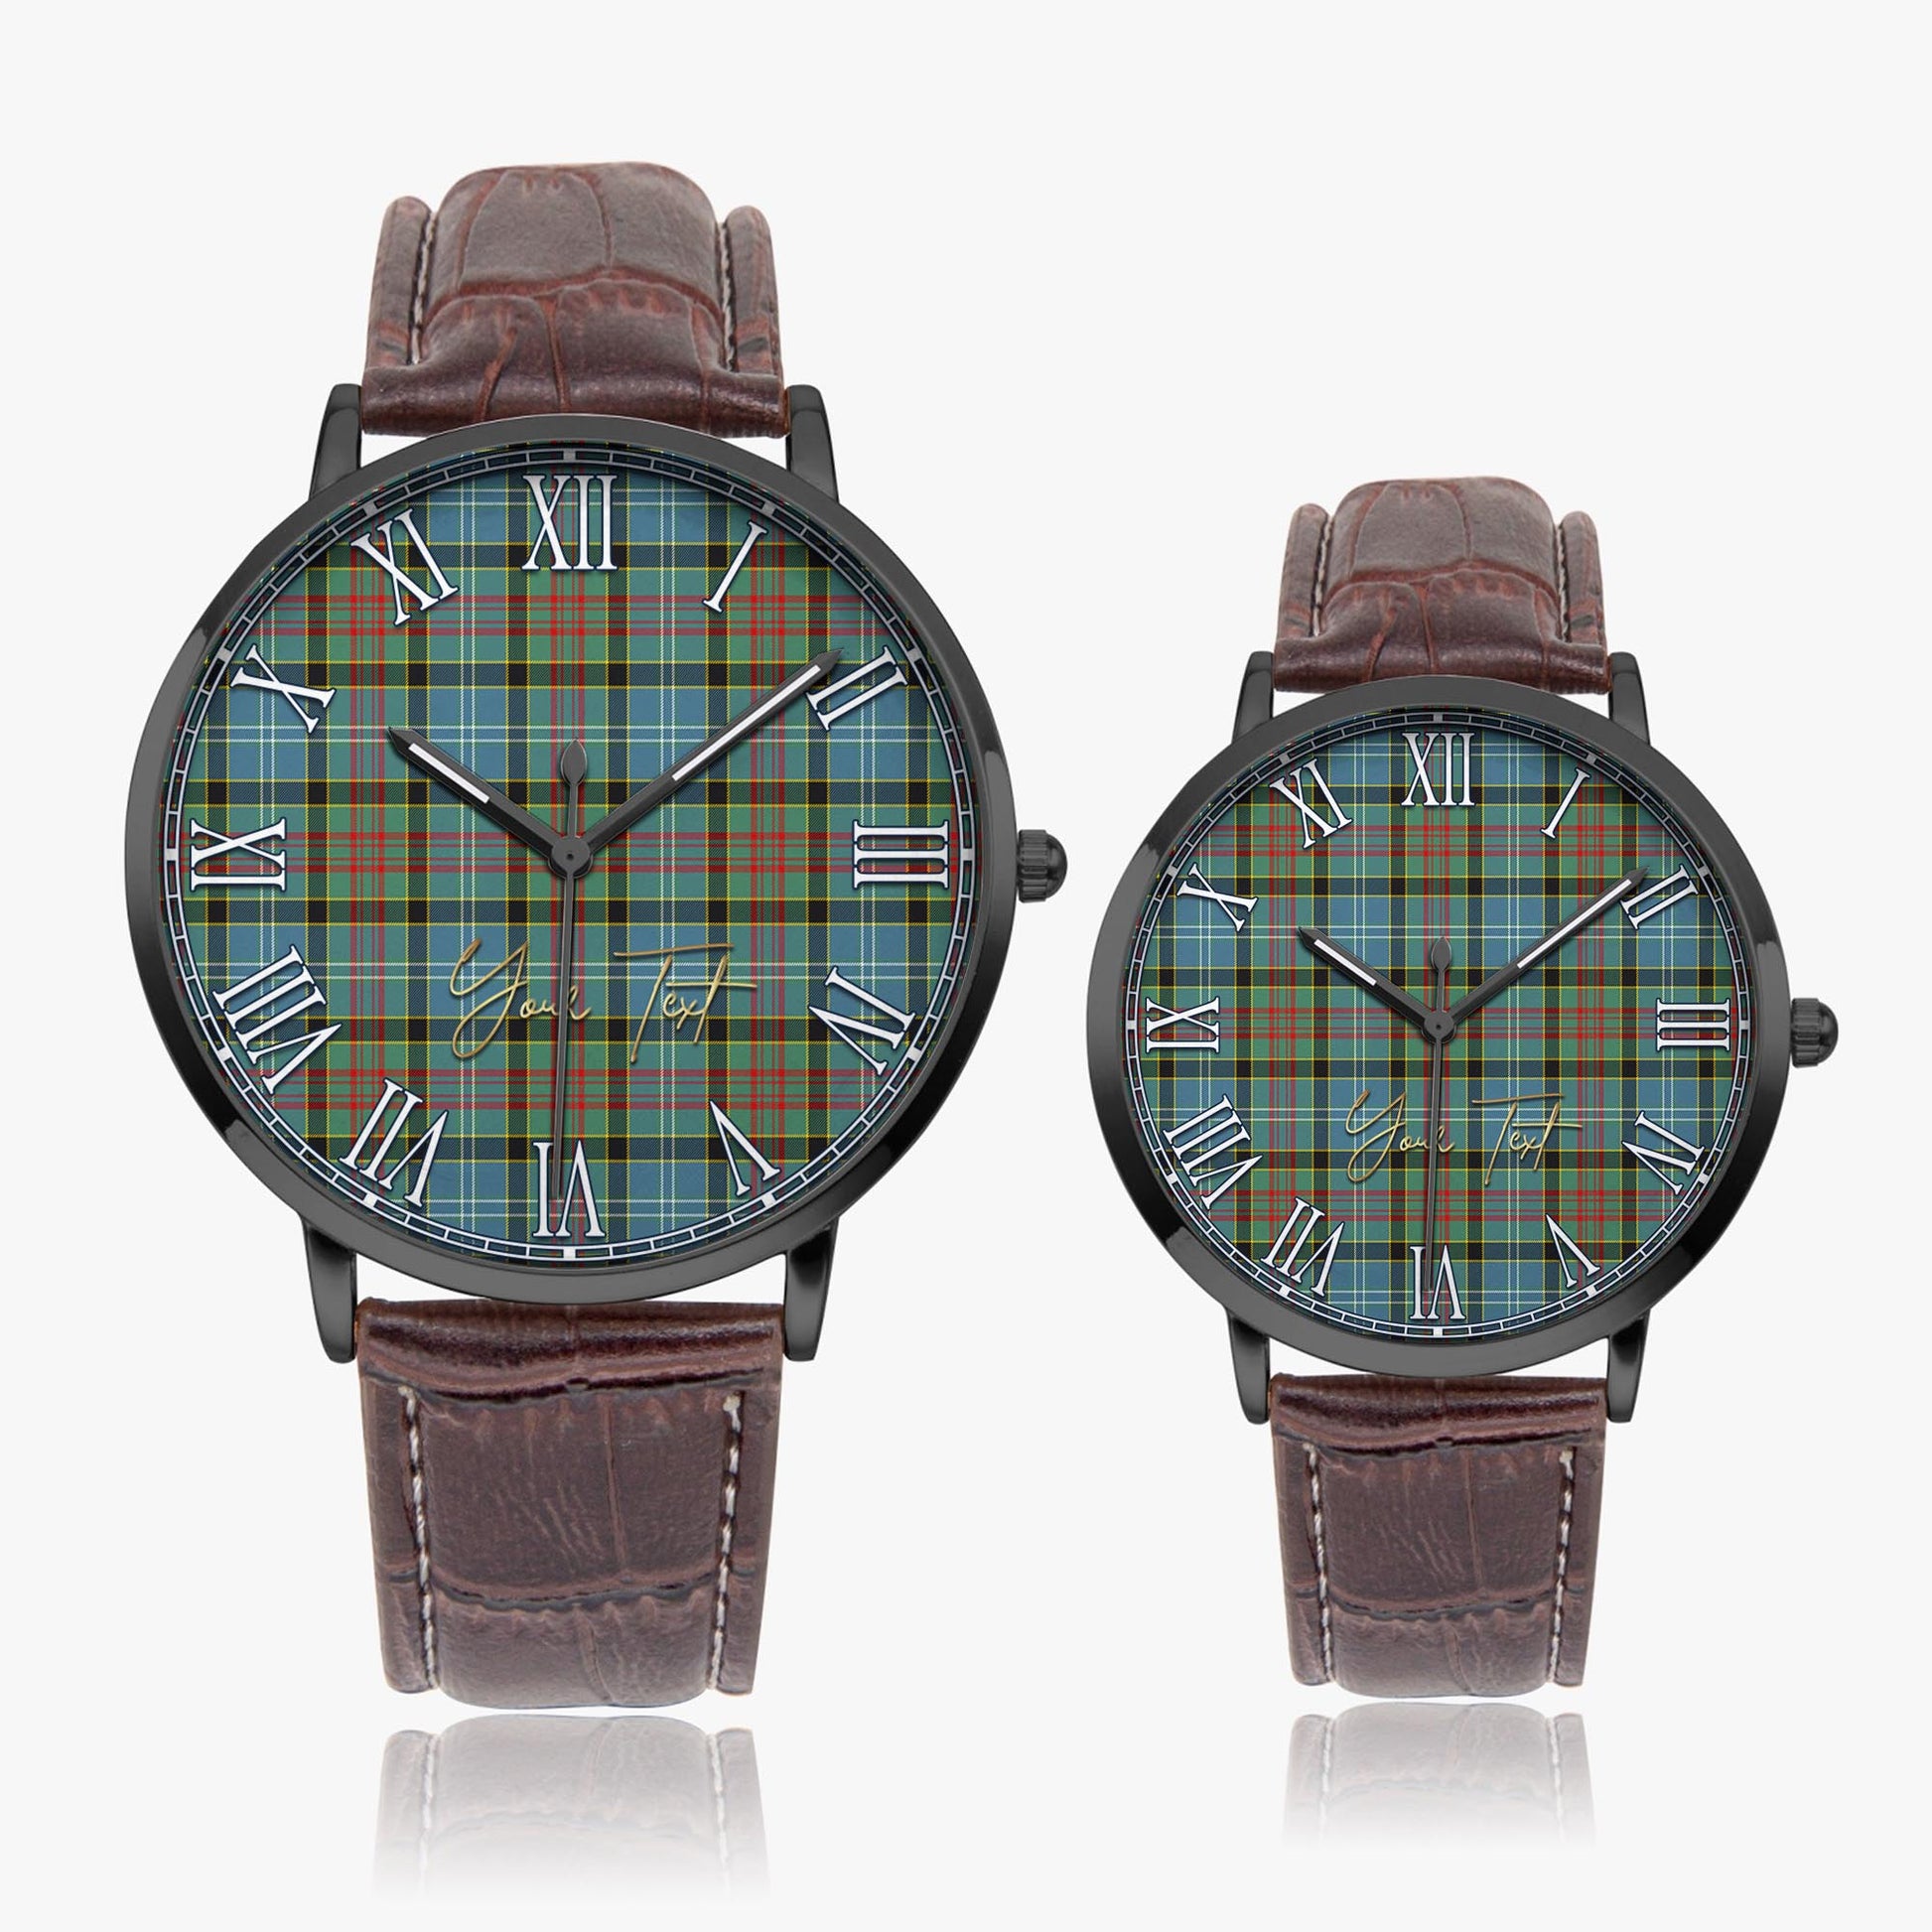 Walkinshaw Tartan Personalized Your Text Leather Trap Quartz Watch Ultra Thin Black Case With Brown Leather Strap - Tartanvibesclothing Shop